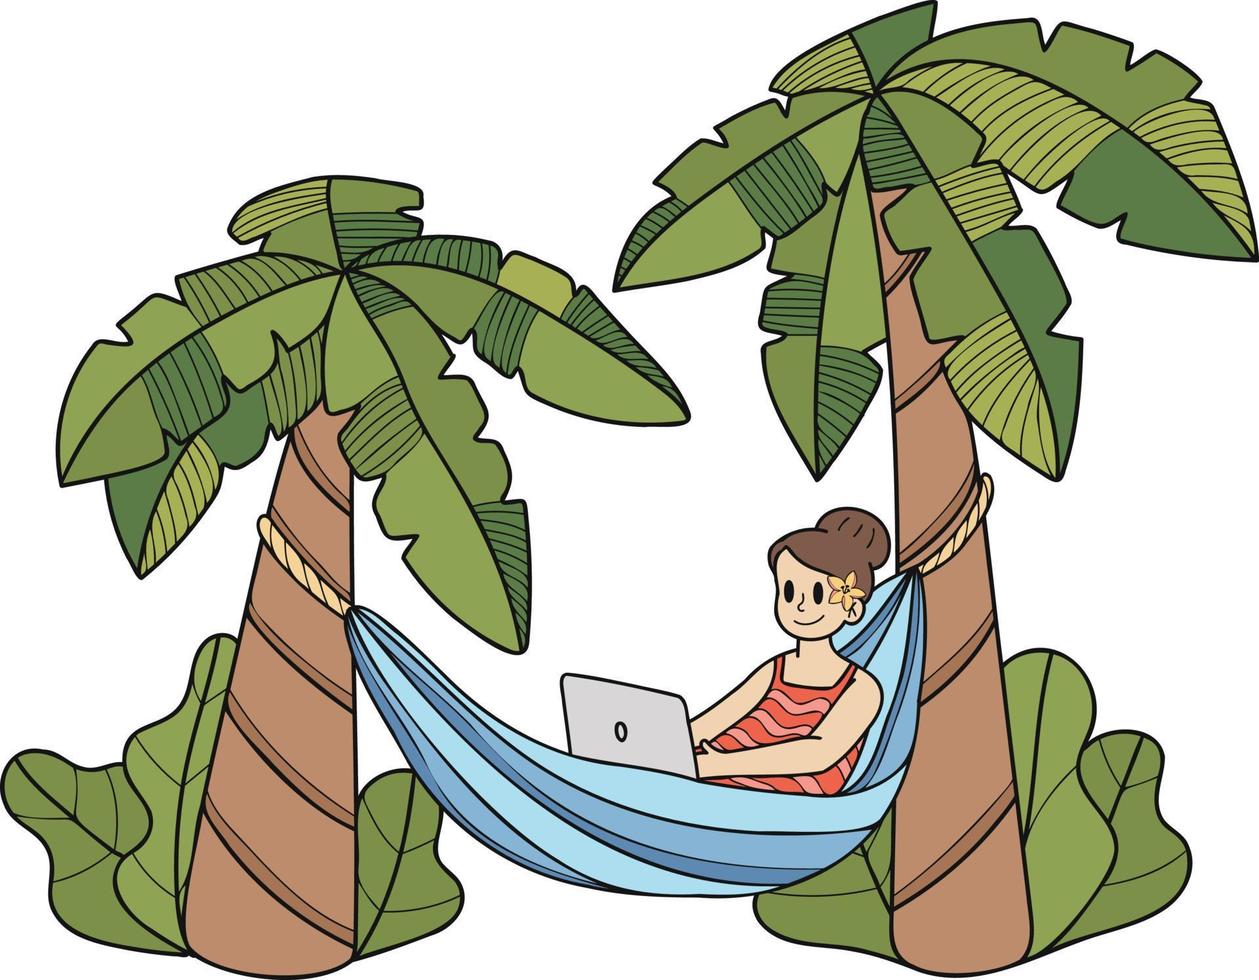 Hand Drawn Freelance woman working on laptop under coconut tree illustration in doodle style vector